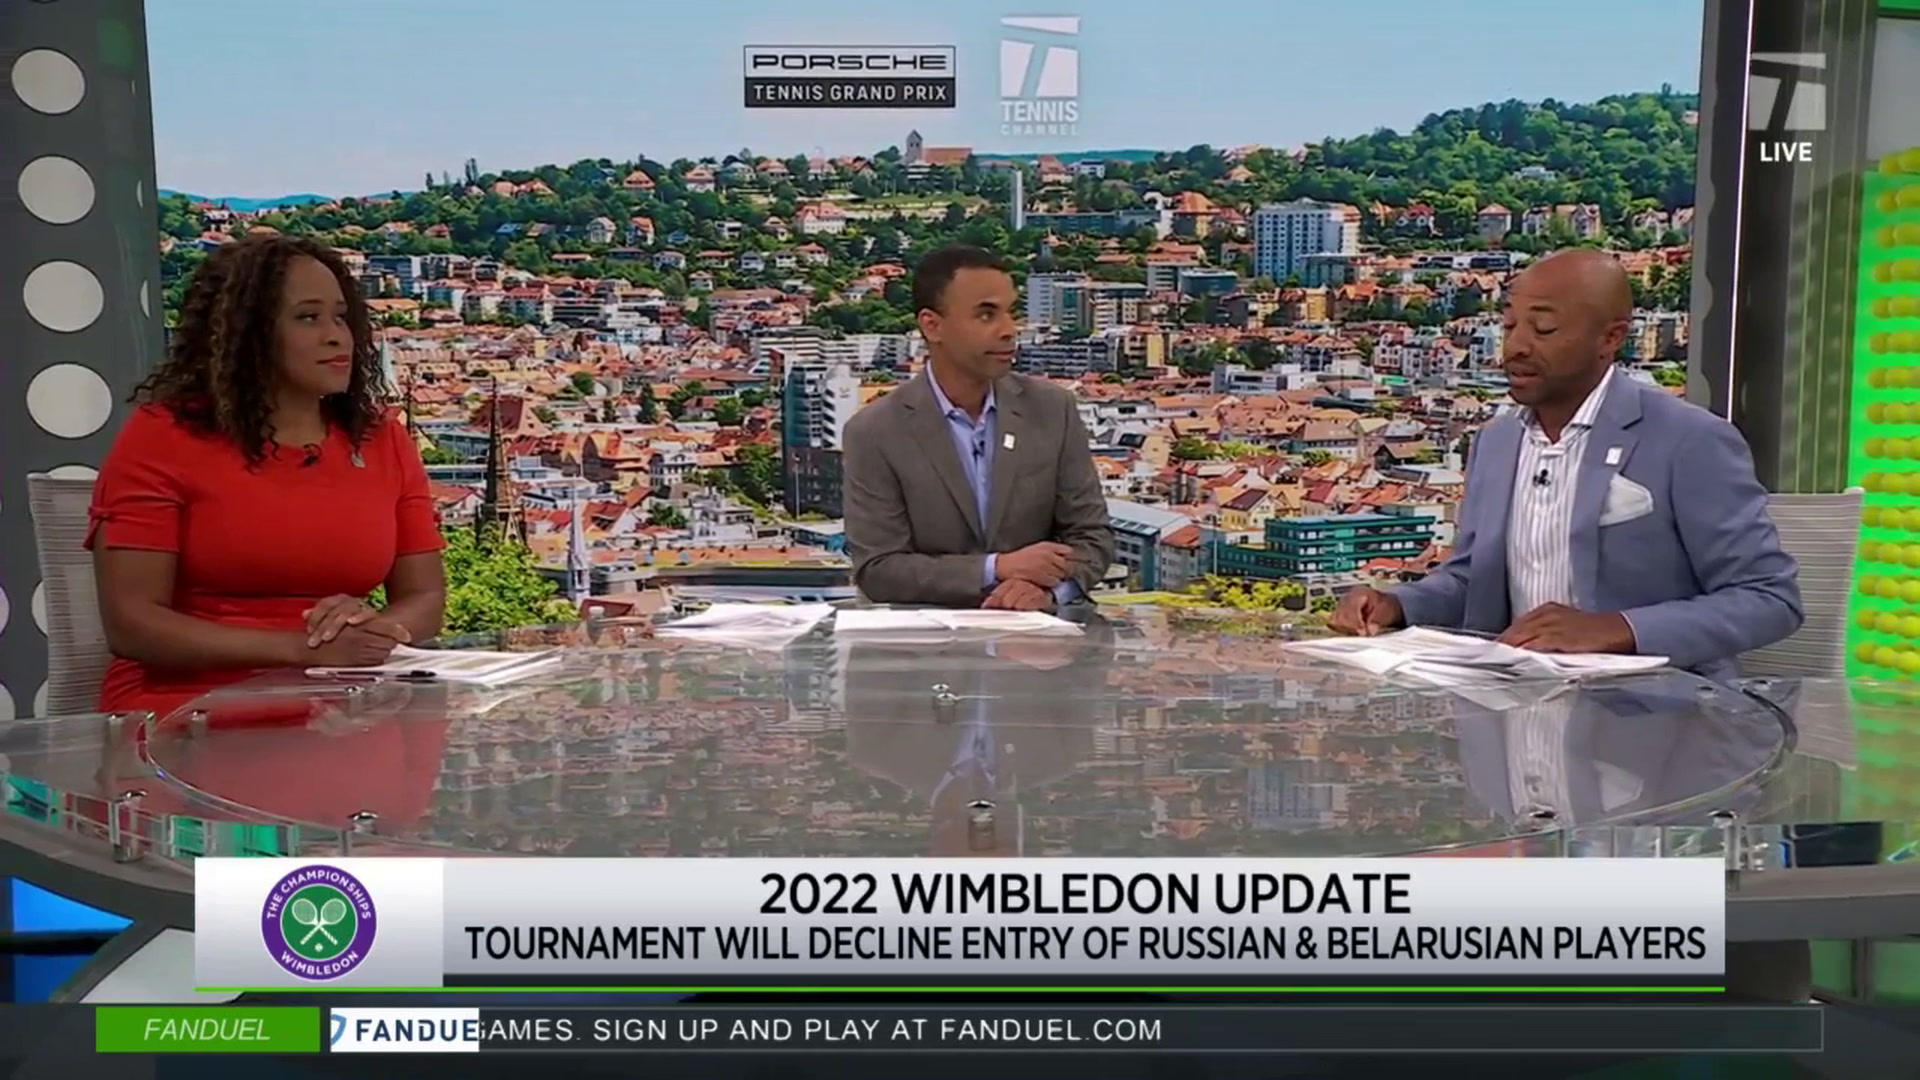 Wimbledons decision to ban Russian and Belarusian players gets mixed reaction, with Djokovic speaking against it